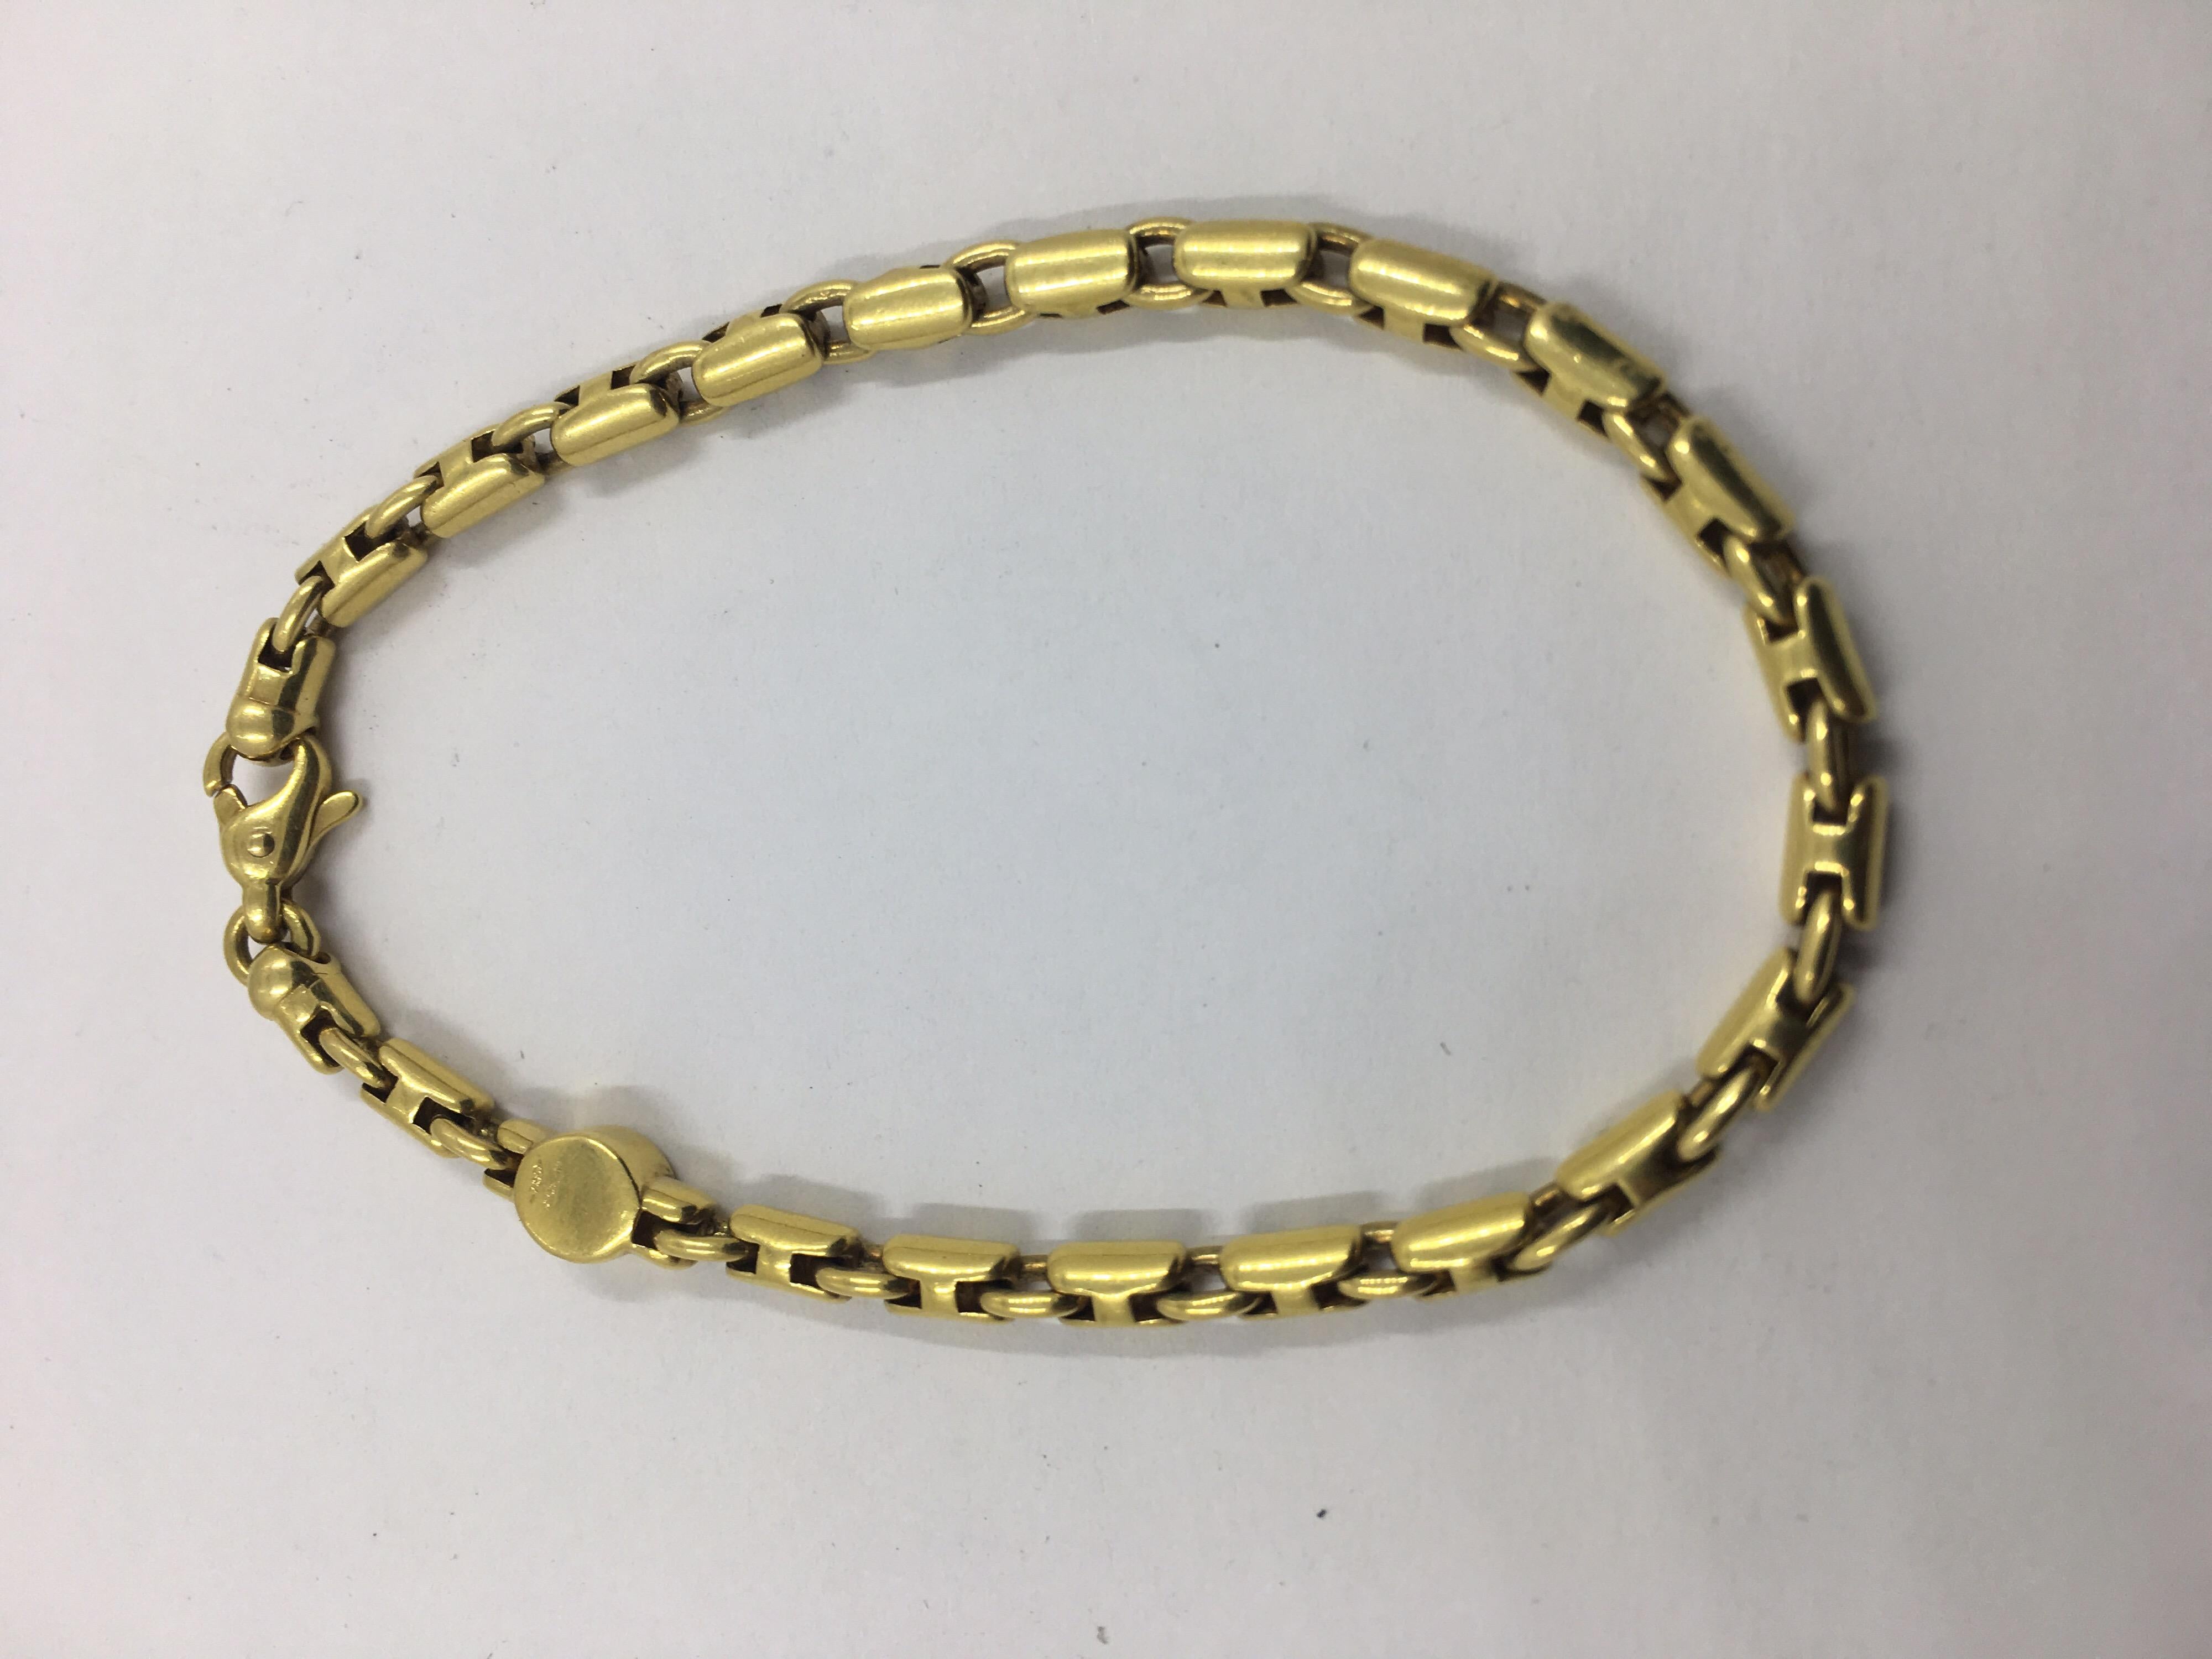 18Kt Yellow Gold Link Bracelet 
By Garzi Atezzo 
Made in Italy
22.40 grams 
Length 7.5